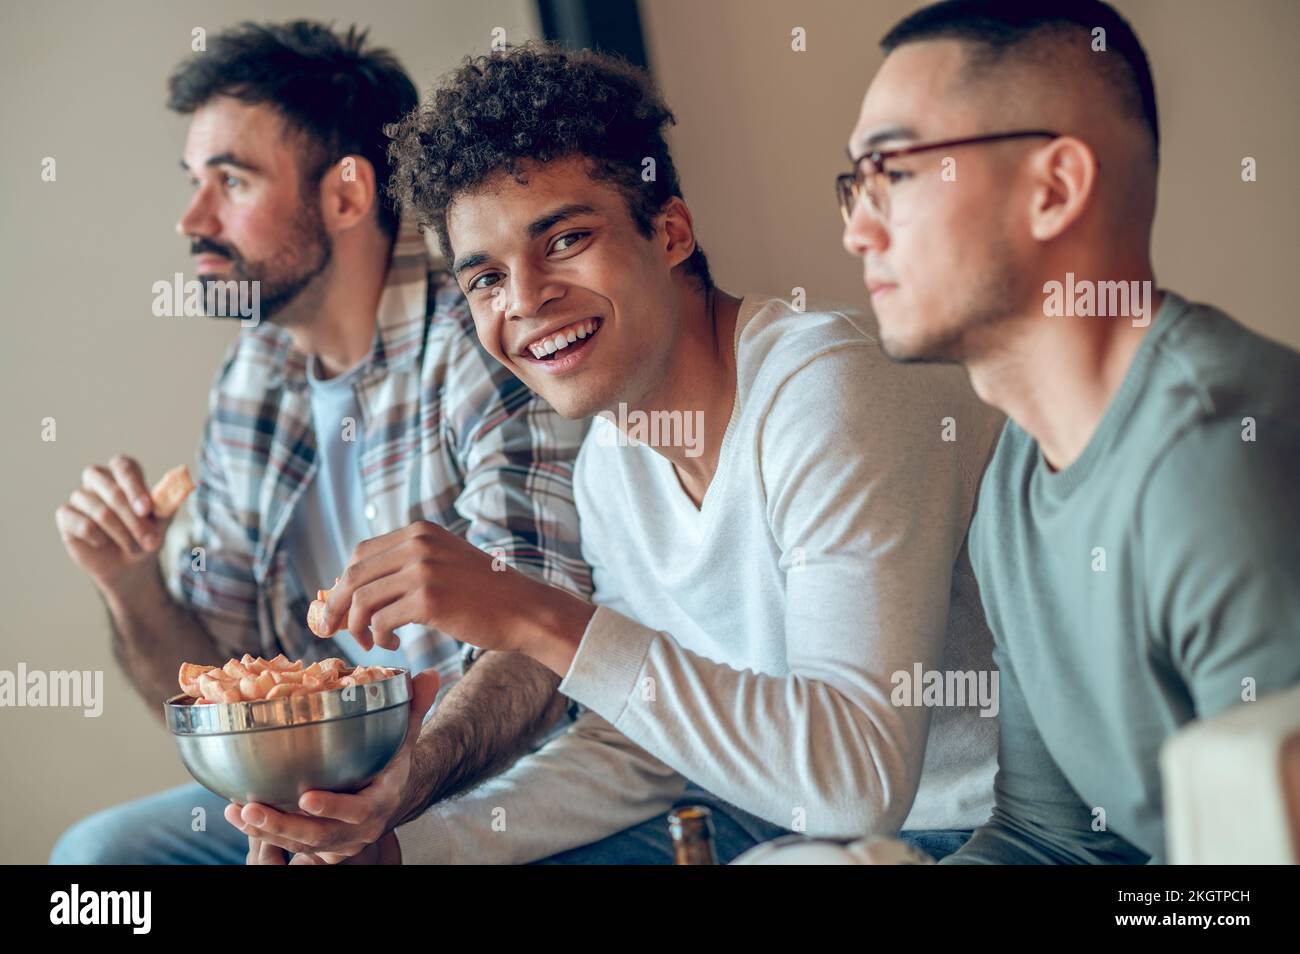 Merry guy snacking on chips in presence of his pals Stock Photo